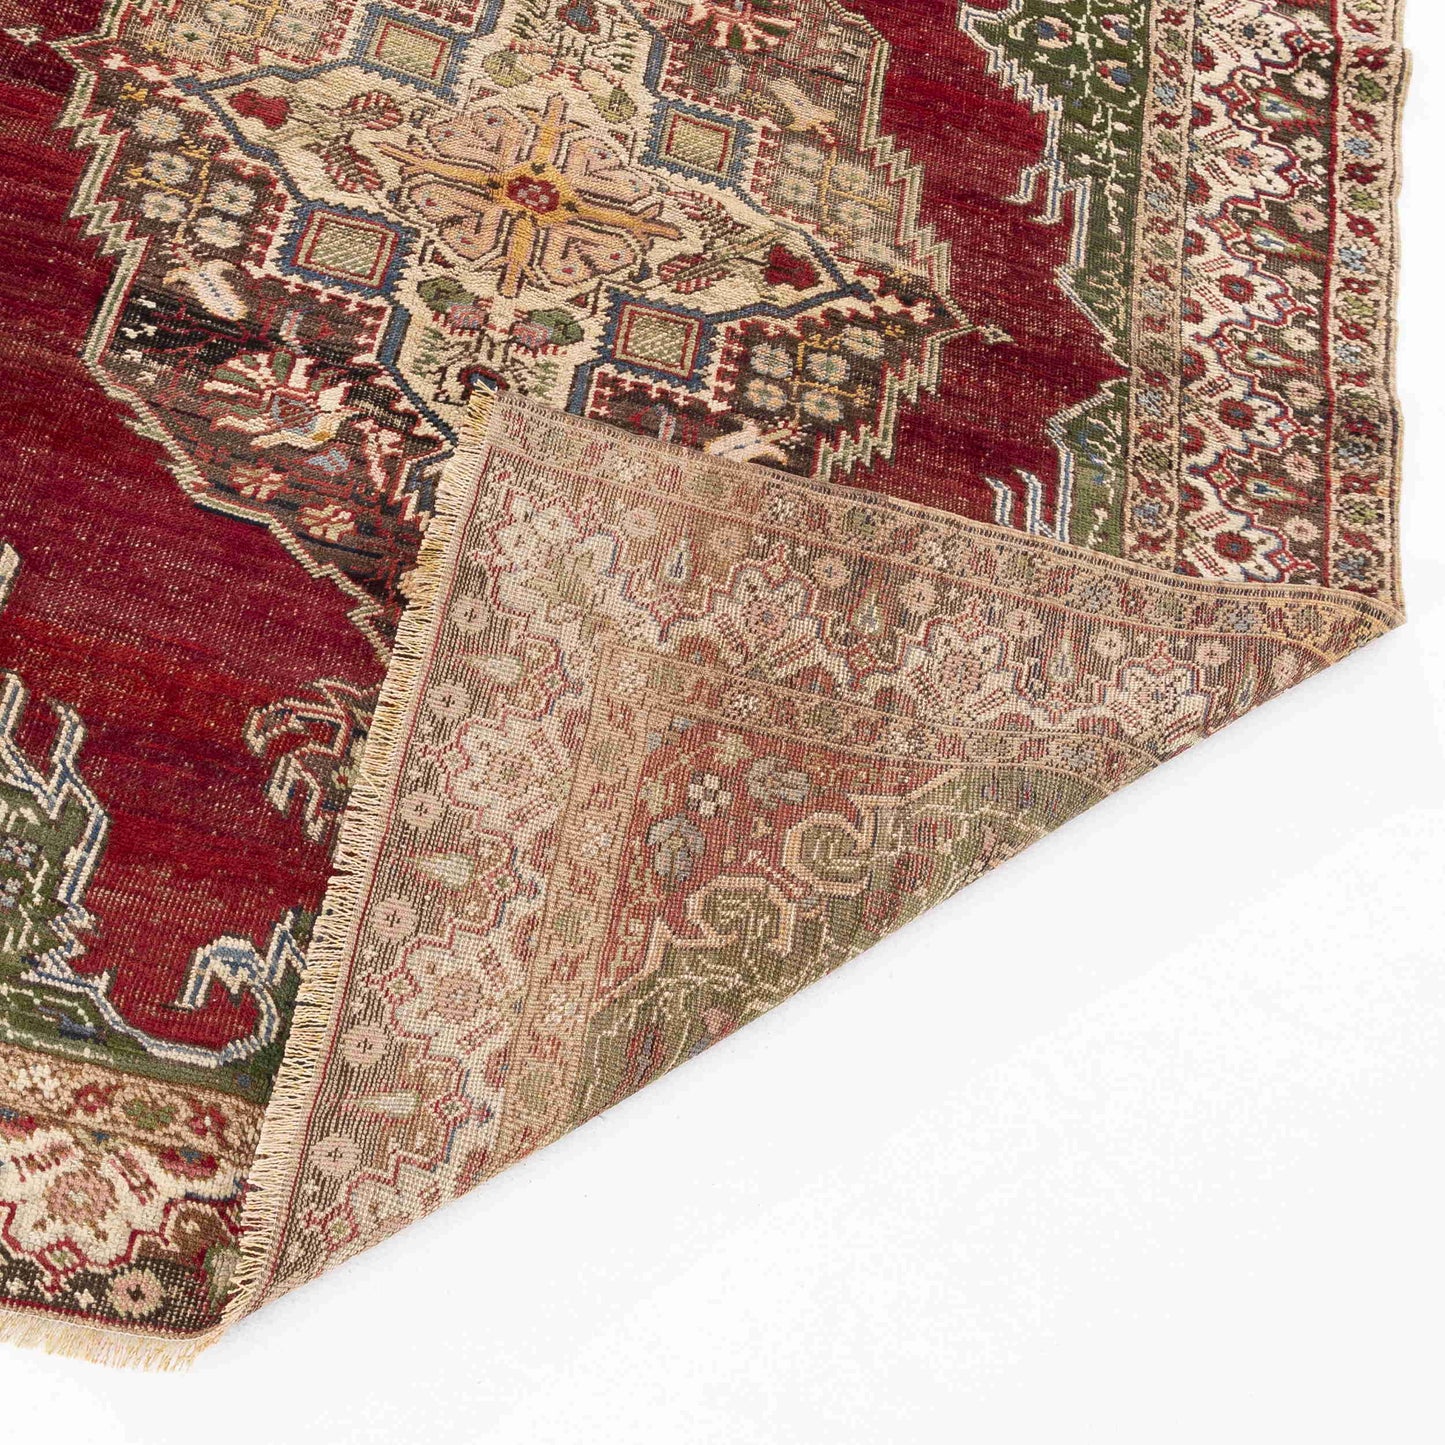 Oriental Rug Anatolian Hand Knotted Wool On Wool 139 X 178 Cm - 4' 7'' X 5' 11'' Red C014 ER01